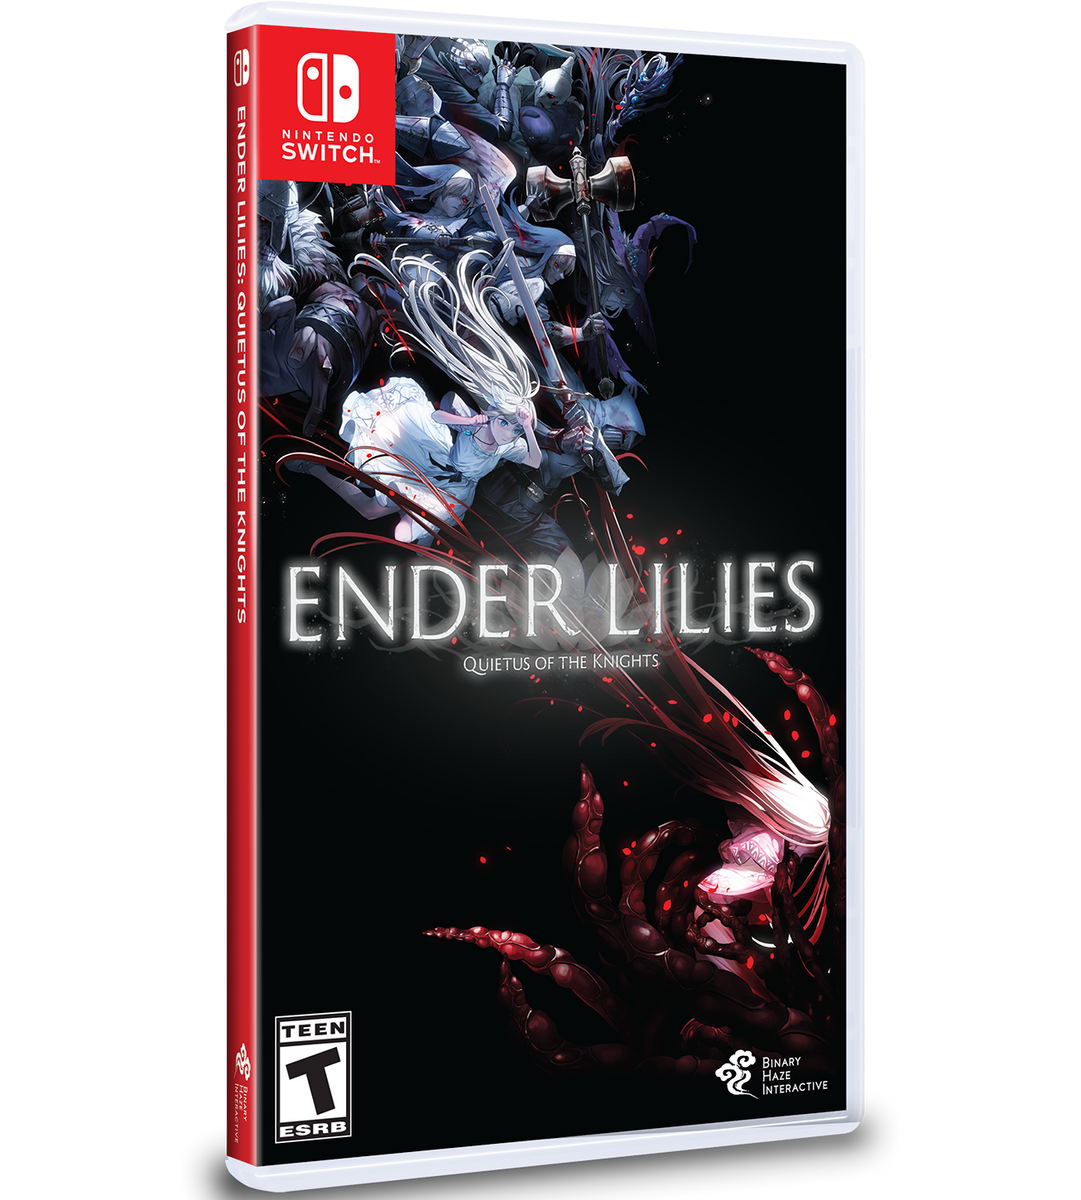 ENDER LILIES Quietus of the Knights NINTENDO SWITCH Game JAPAN